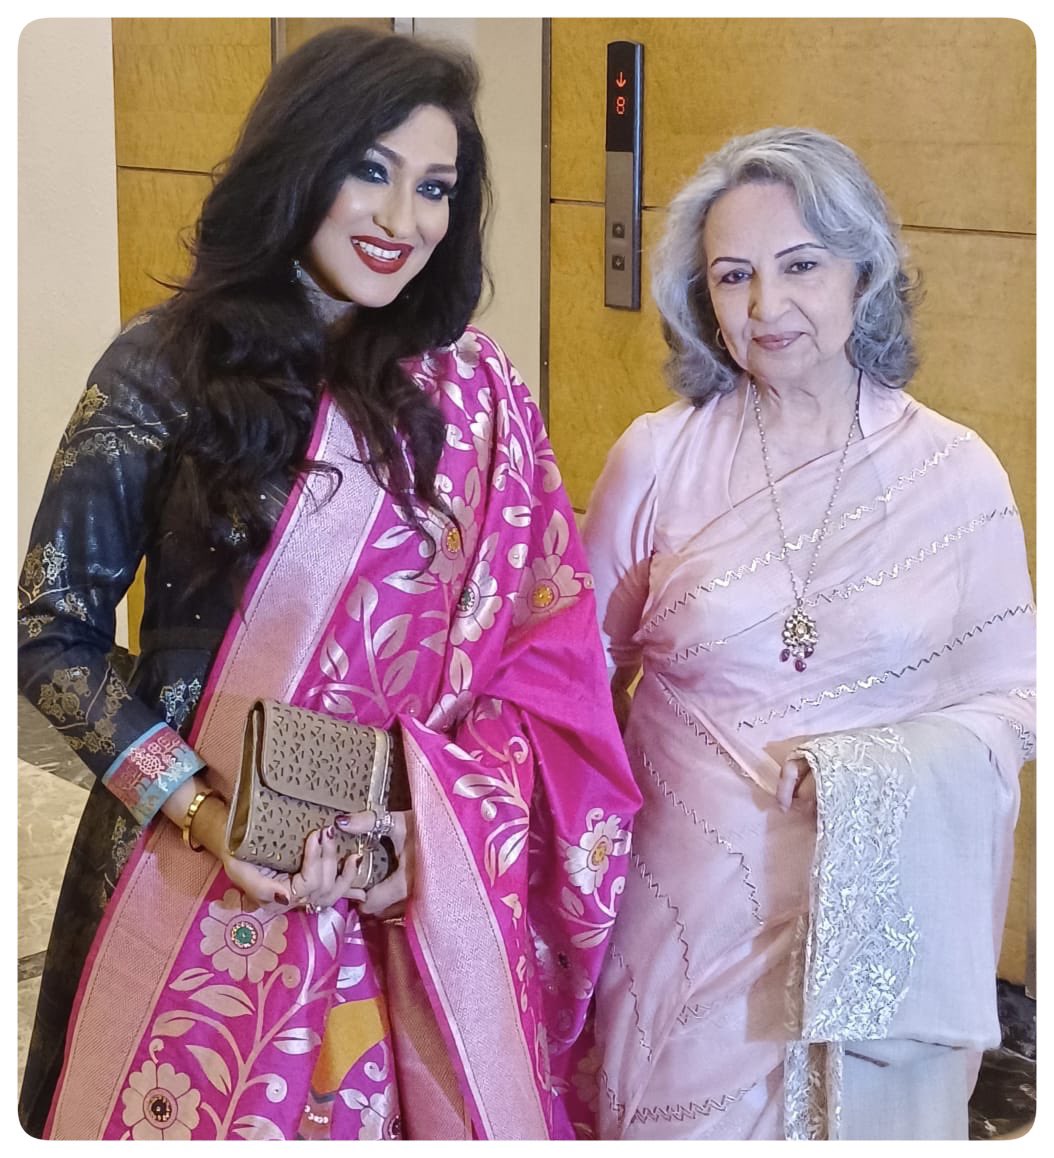 SHARMILA TAGORE - RITUPARNA SENGUPTA TO STAR IN MOTHER - DAUGHTER STORY… In a casting coup of sorts, #SharmilaTagore and #Bengali superstar #RituparnaSengupta - both powerhouse of talent - will feature in an emotional mother - daughter story, penned by #NationalAward winning